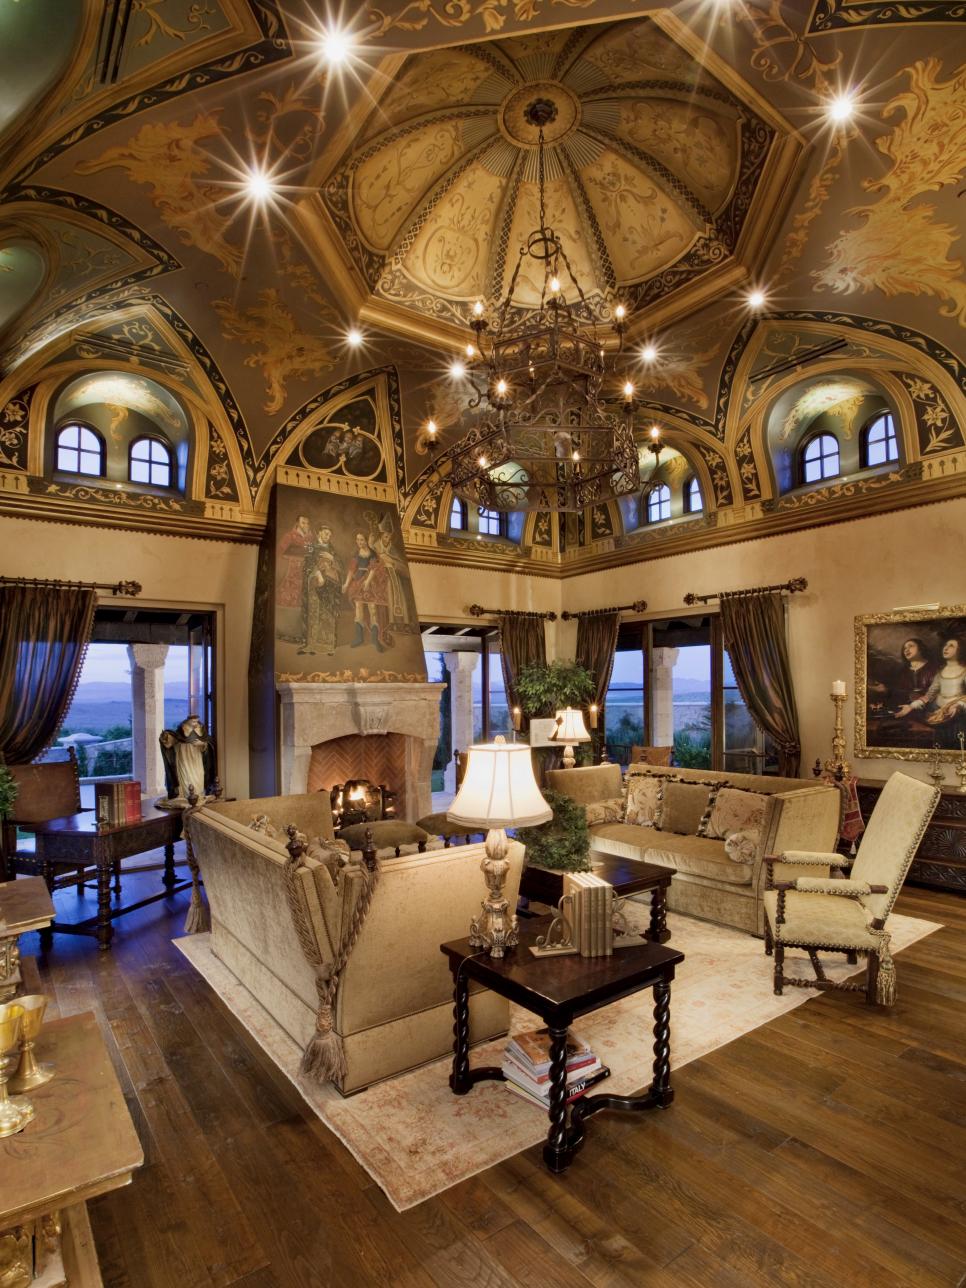 Living Room With Gothic Art Ceiling and Large Chandelier